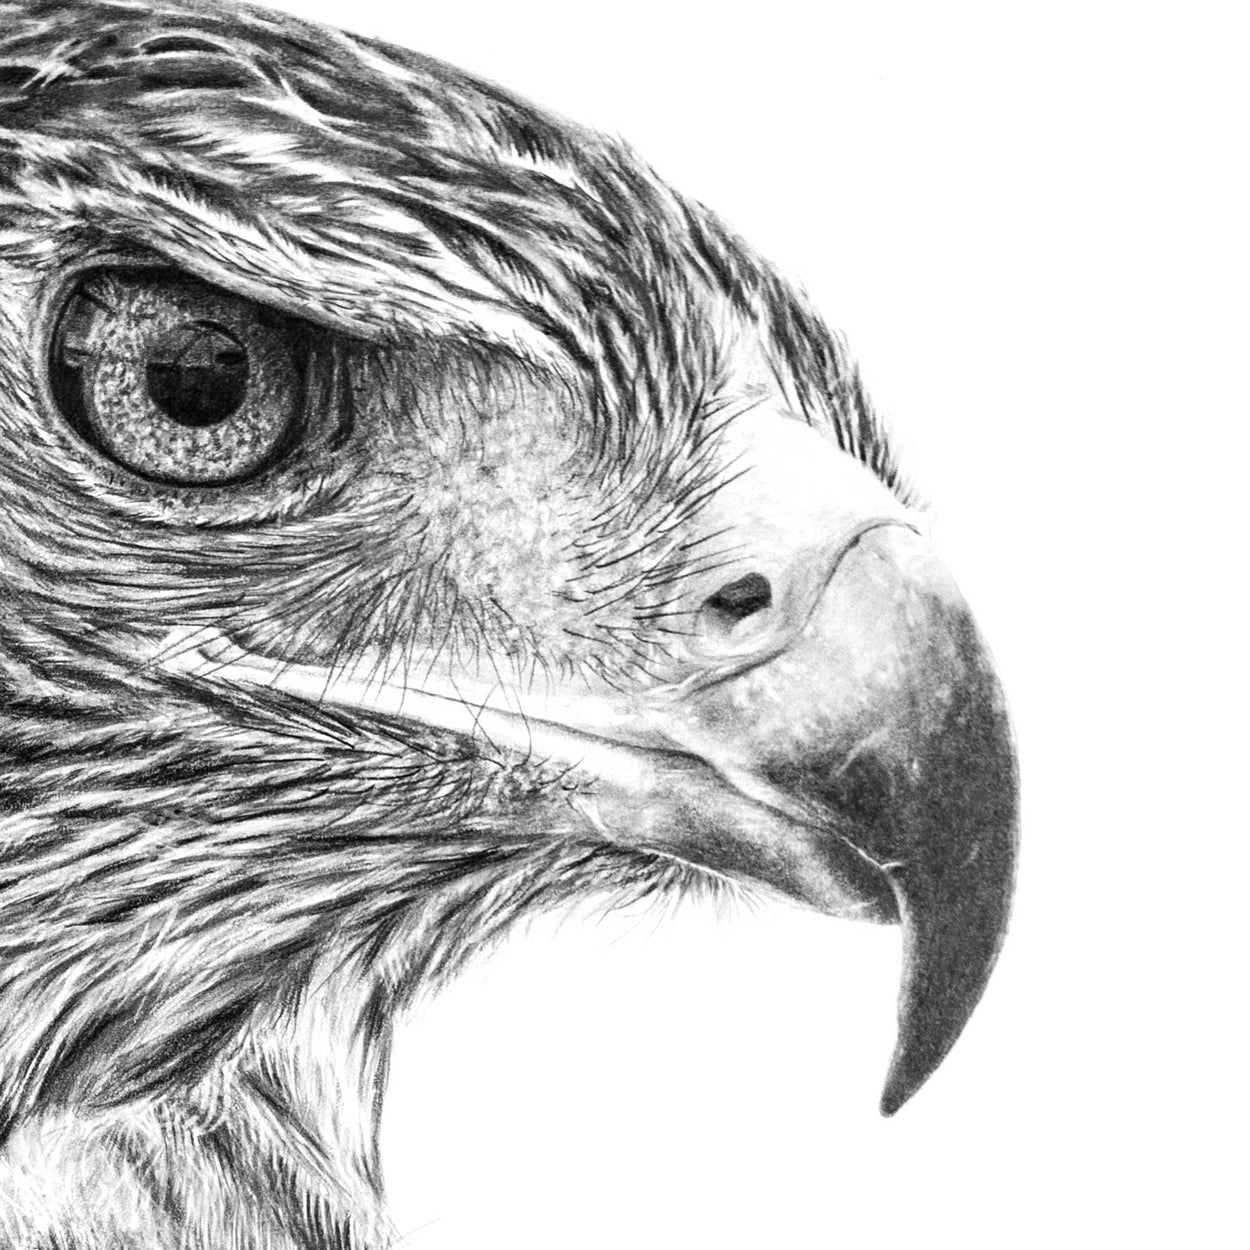 Close-up detail of a pencil drawing of a golden eagle beak, eye and head